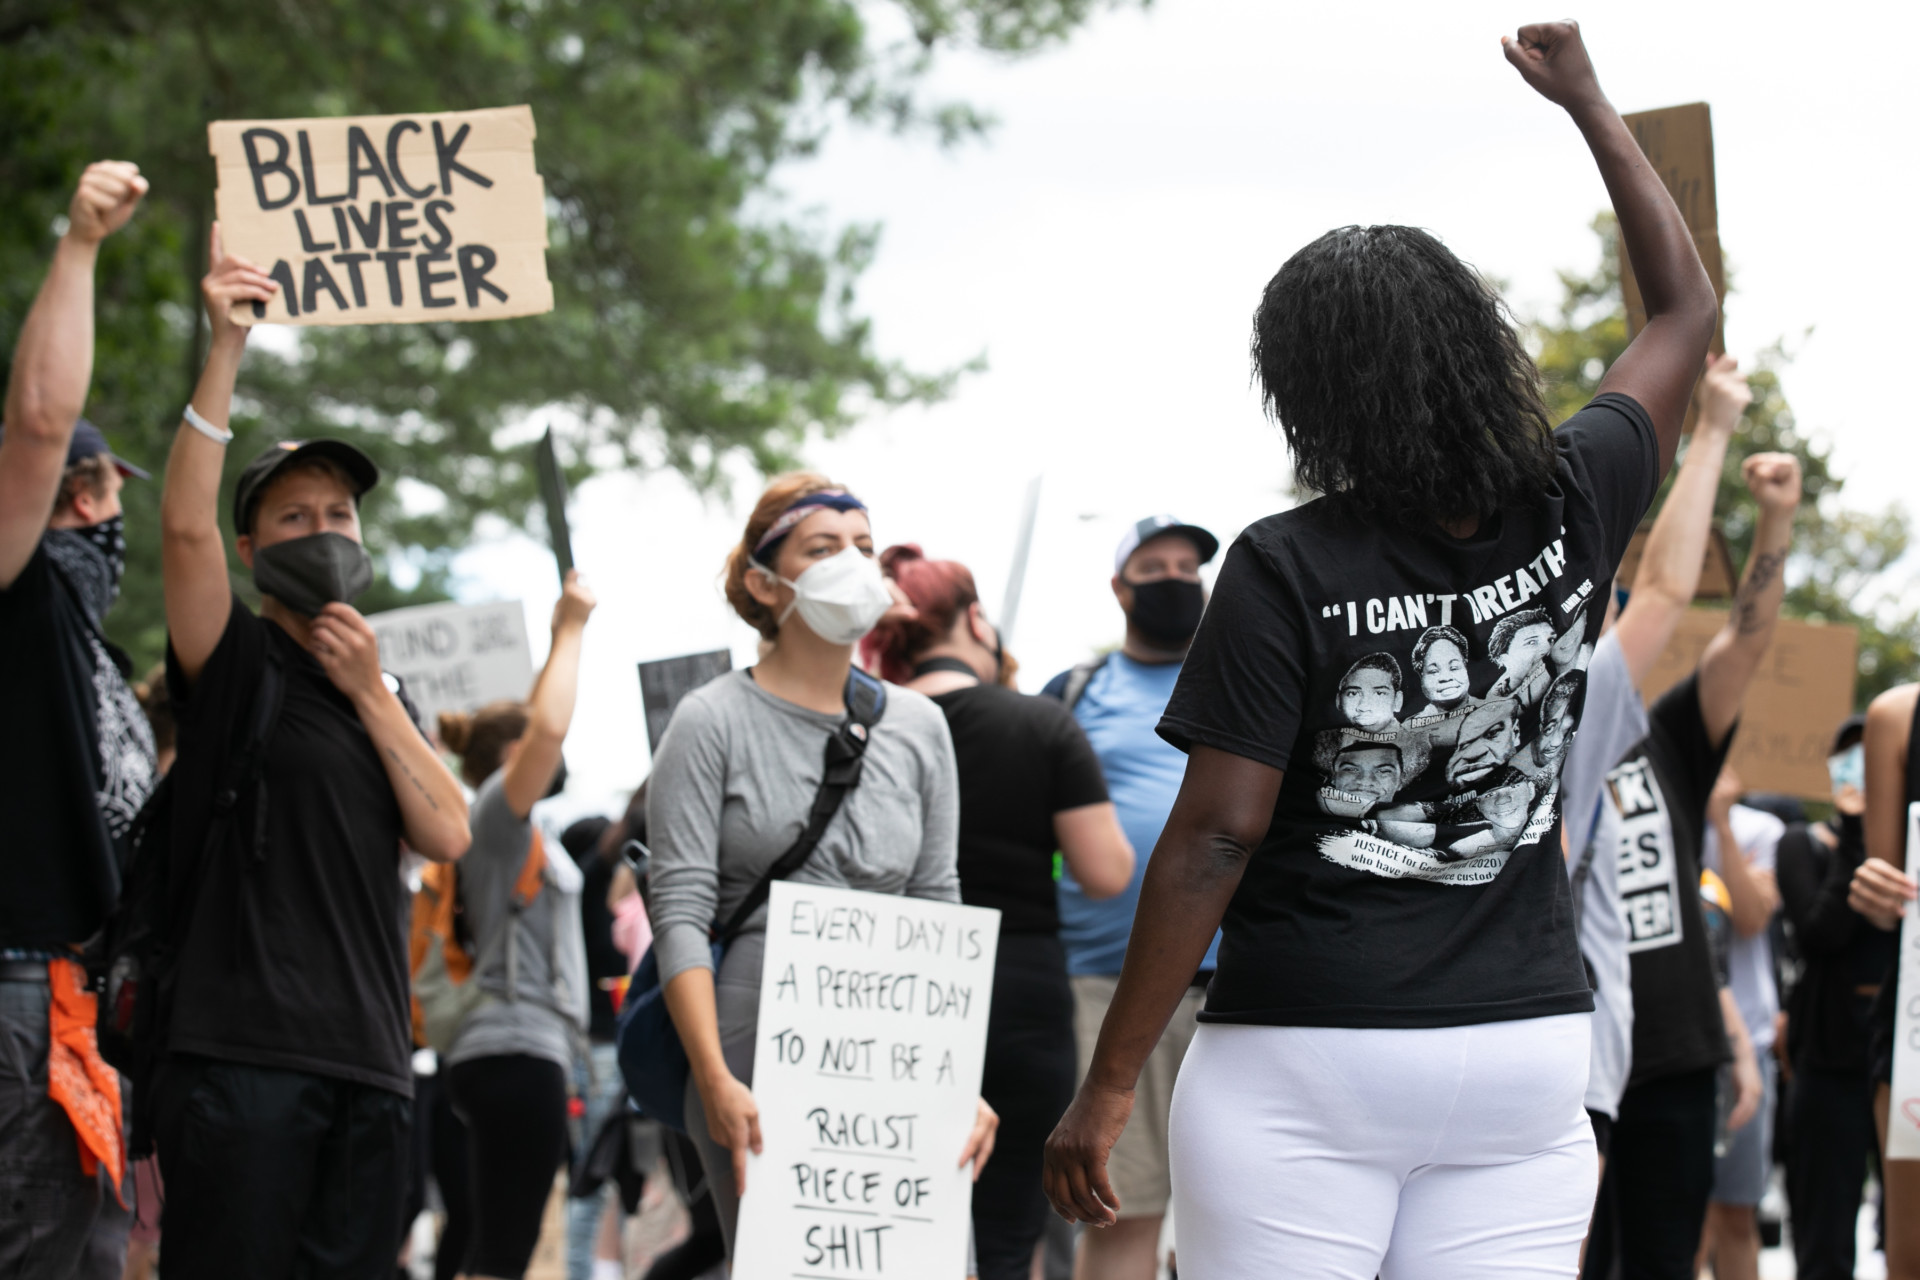 Confronting Racist Ideals in American Policing